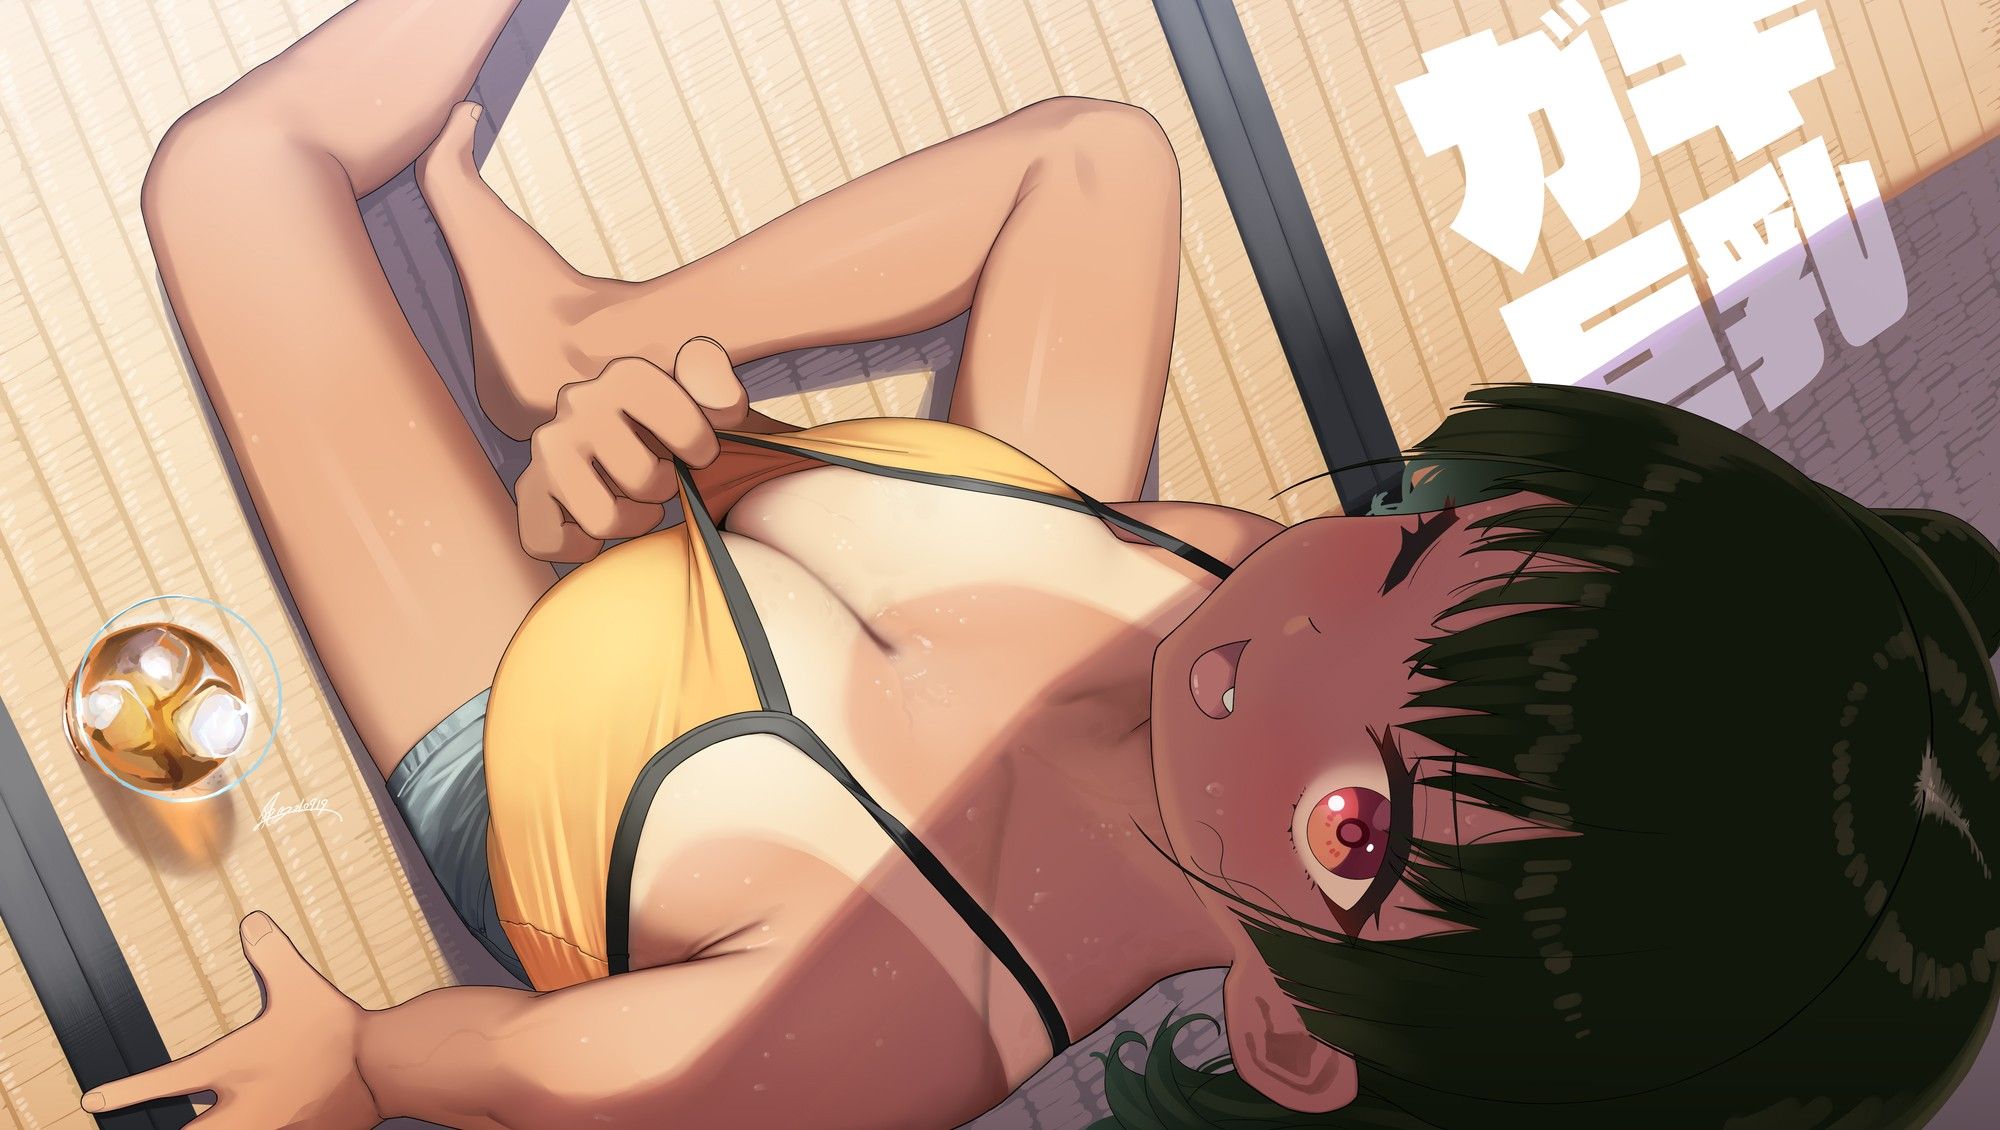 【2nd】Erotic image of a girl with a sunburn after Part 17 2